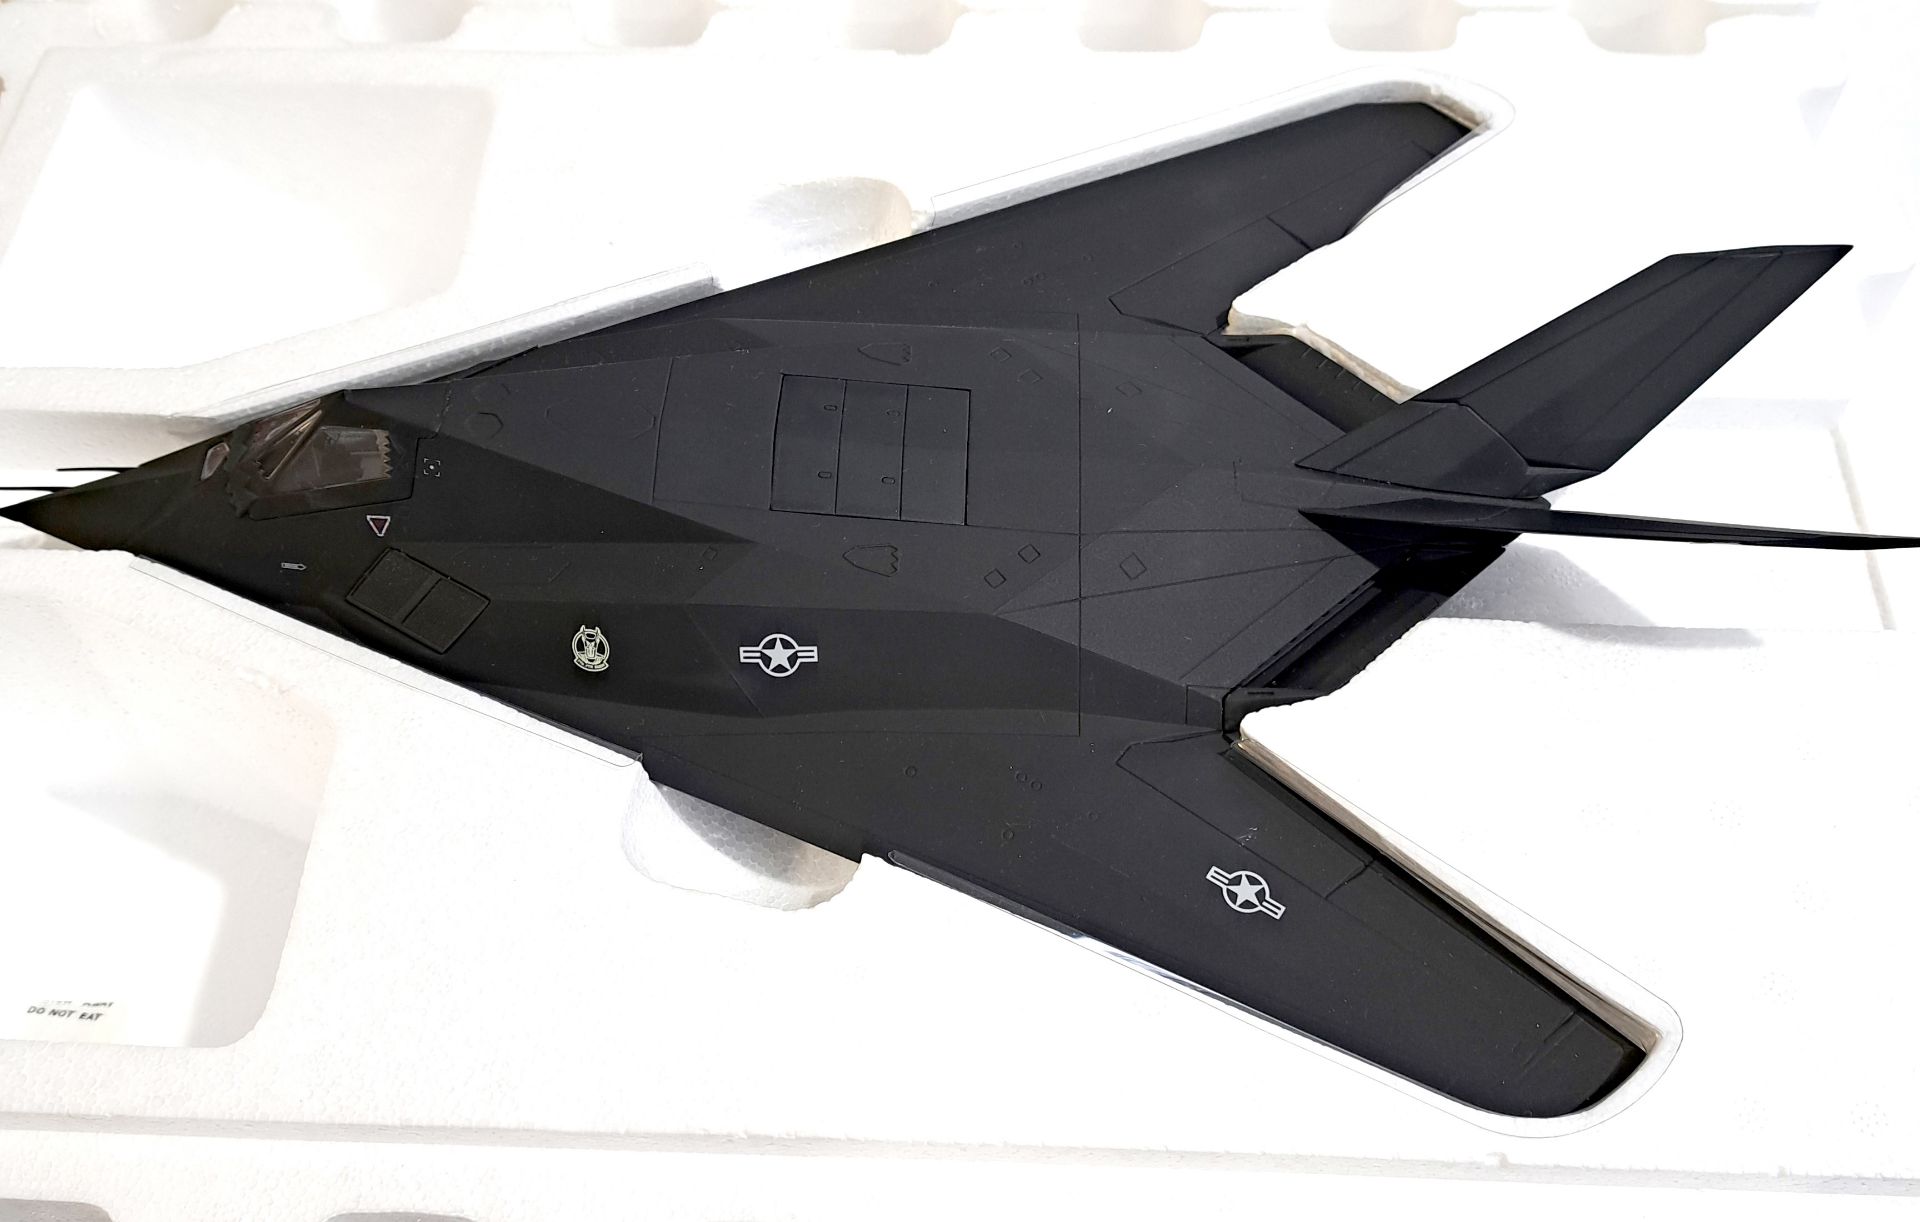 Franklin Mint  "Armour Collection", a boxed pair of 1:48 scaleF117 Stealth Fighter Jets - Bild 4 aus 4